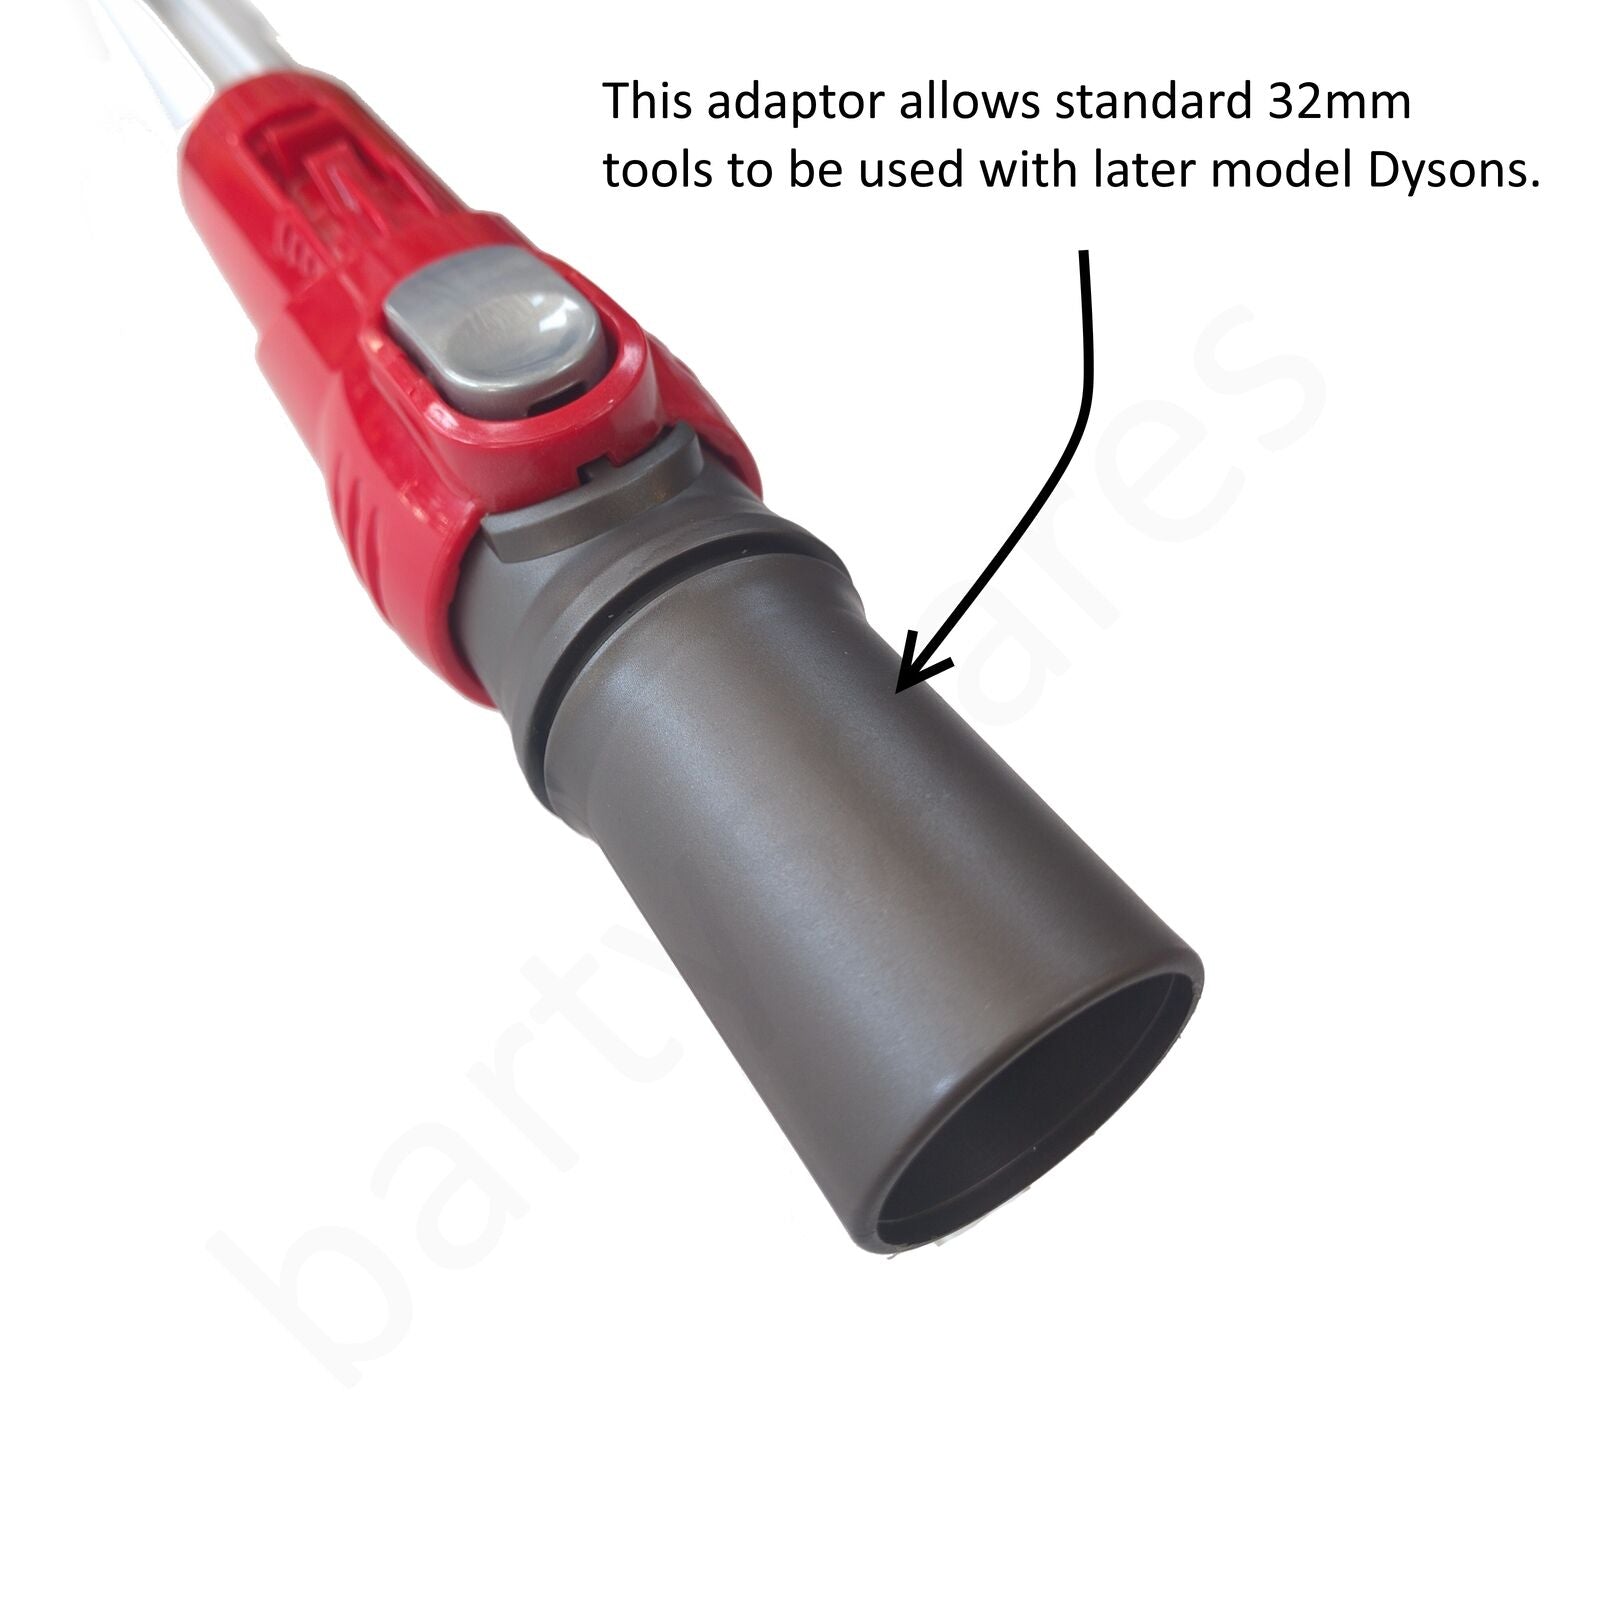 Compatible Universal Dyson Conversion Adaptor Tool from Specialist Dyson Fitting to Standard 32mm Fitting